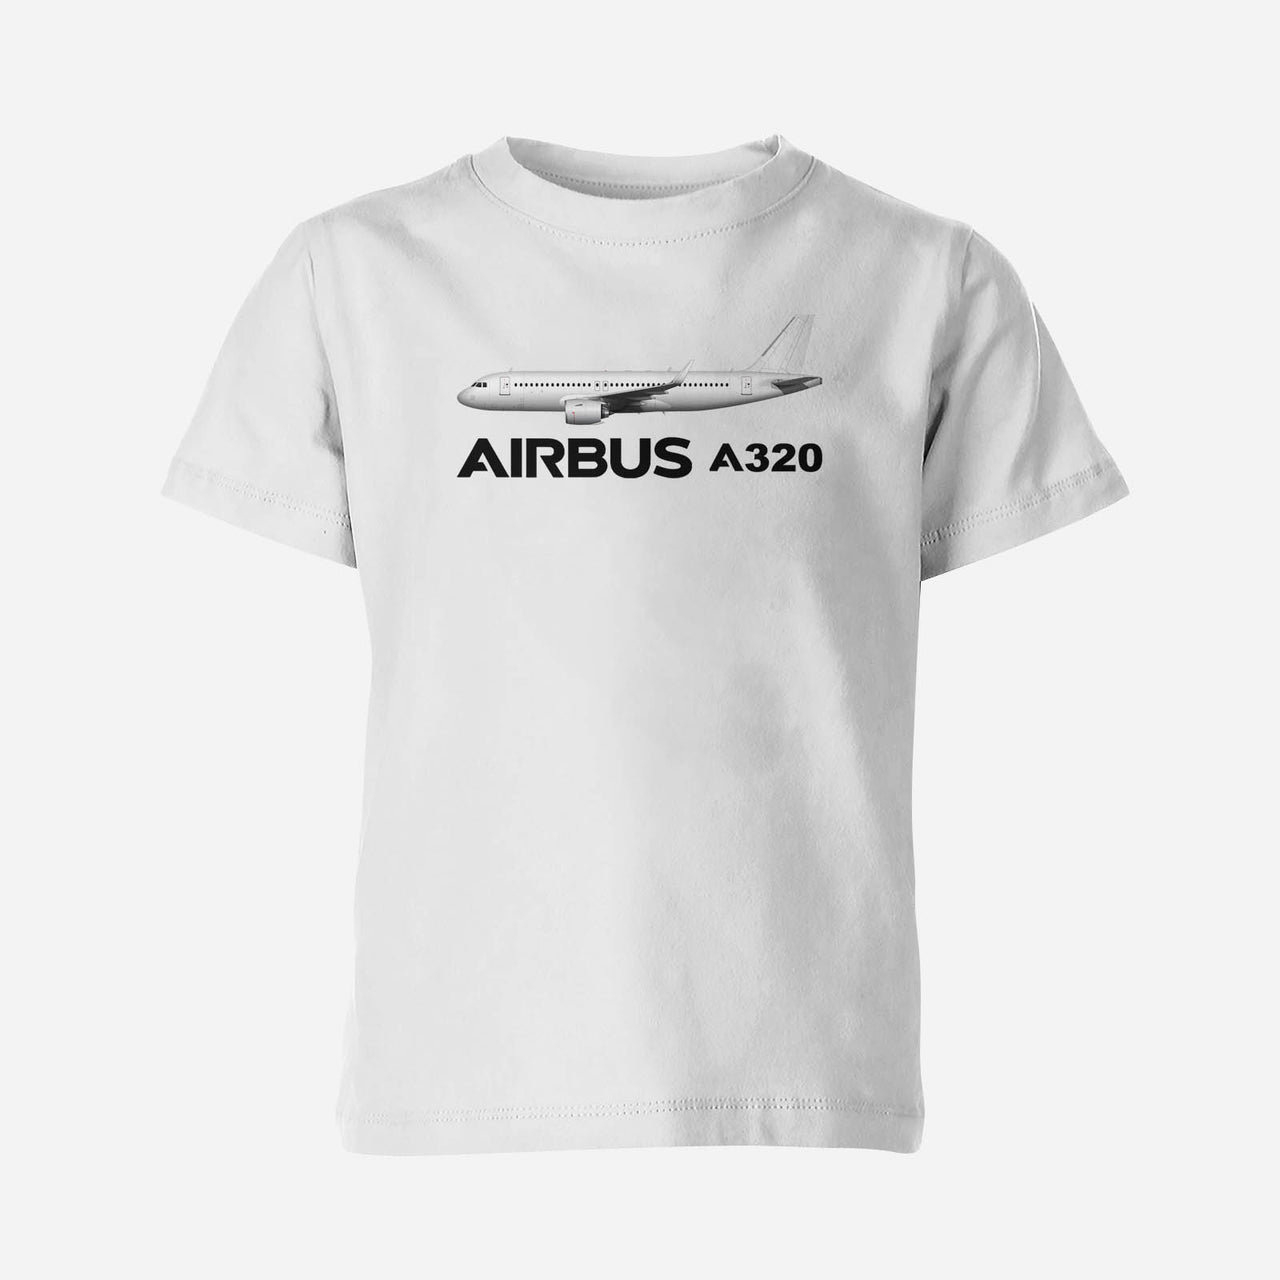 The Airbus A320 Designed Children T-Shirts